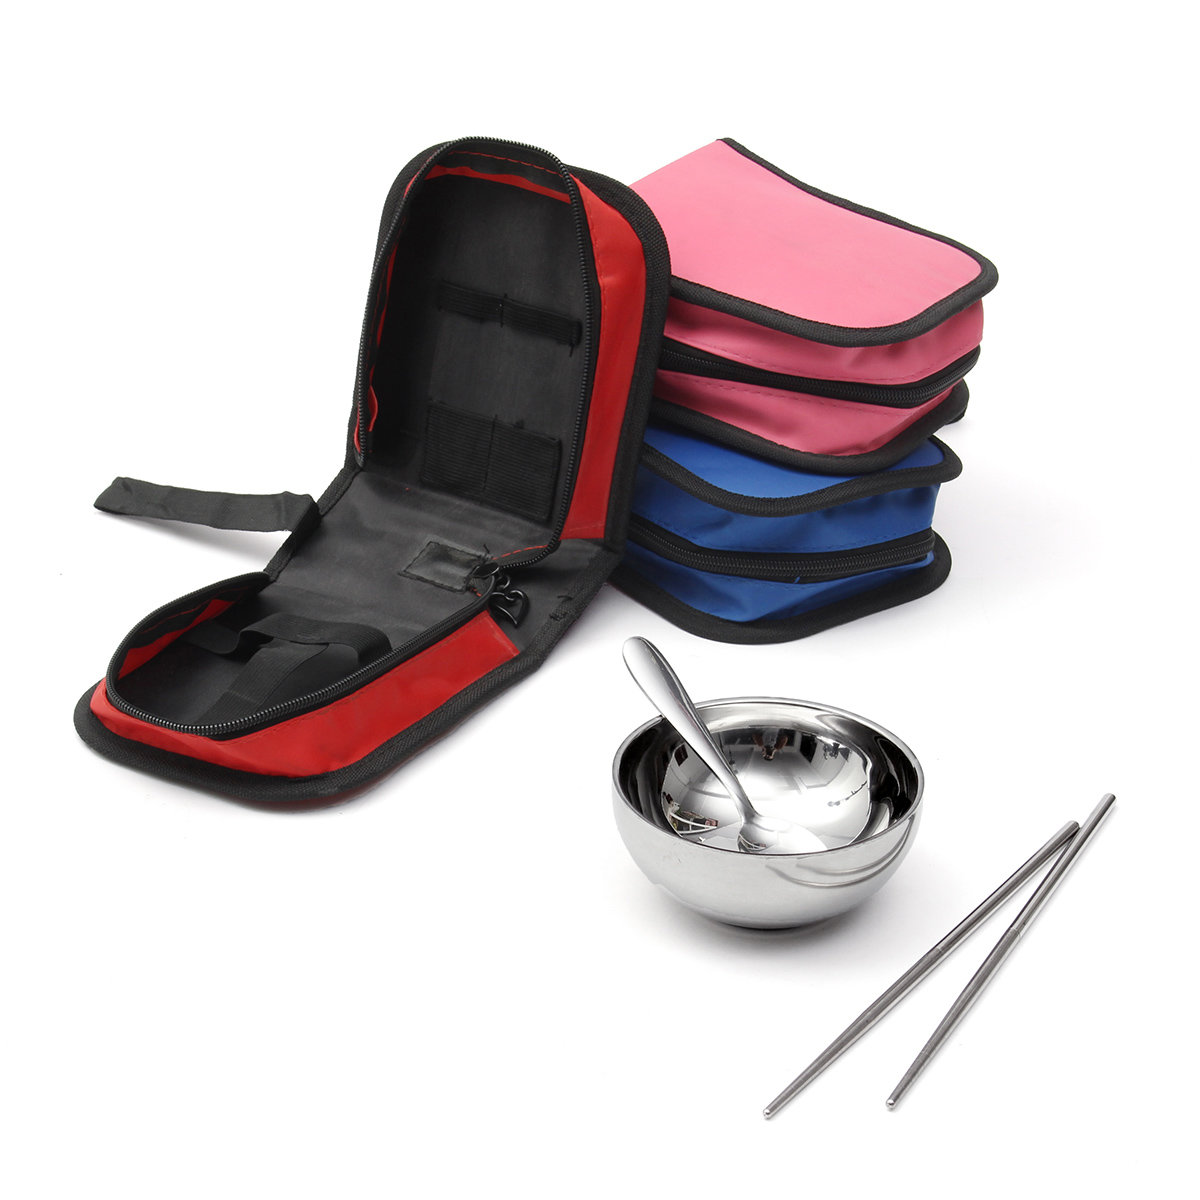 

IPRee™ Outdoor 3 Pcs Sets Portable Stainless Steel Bowl Chopsticks Spoon Storage Bag Travel Picnic Cooking, Pink red blue